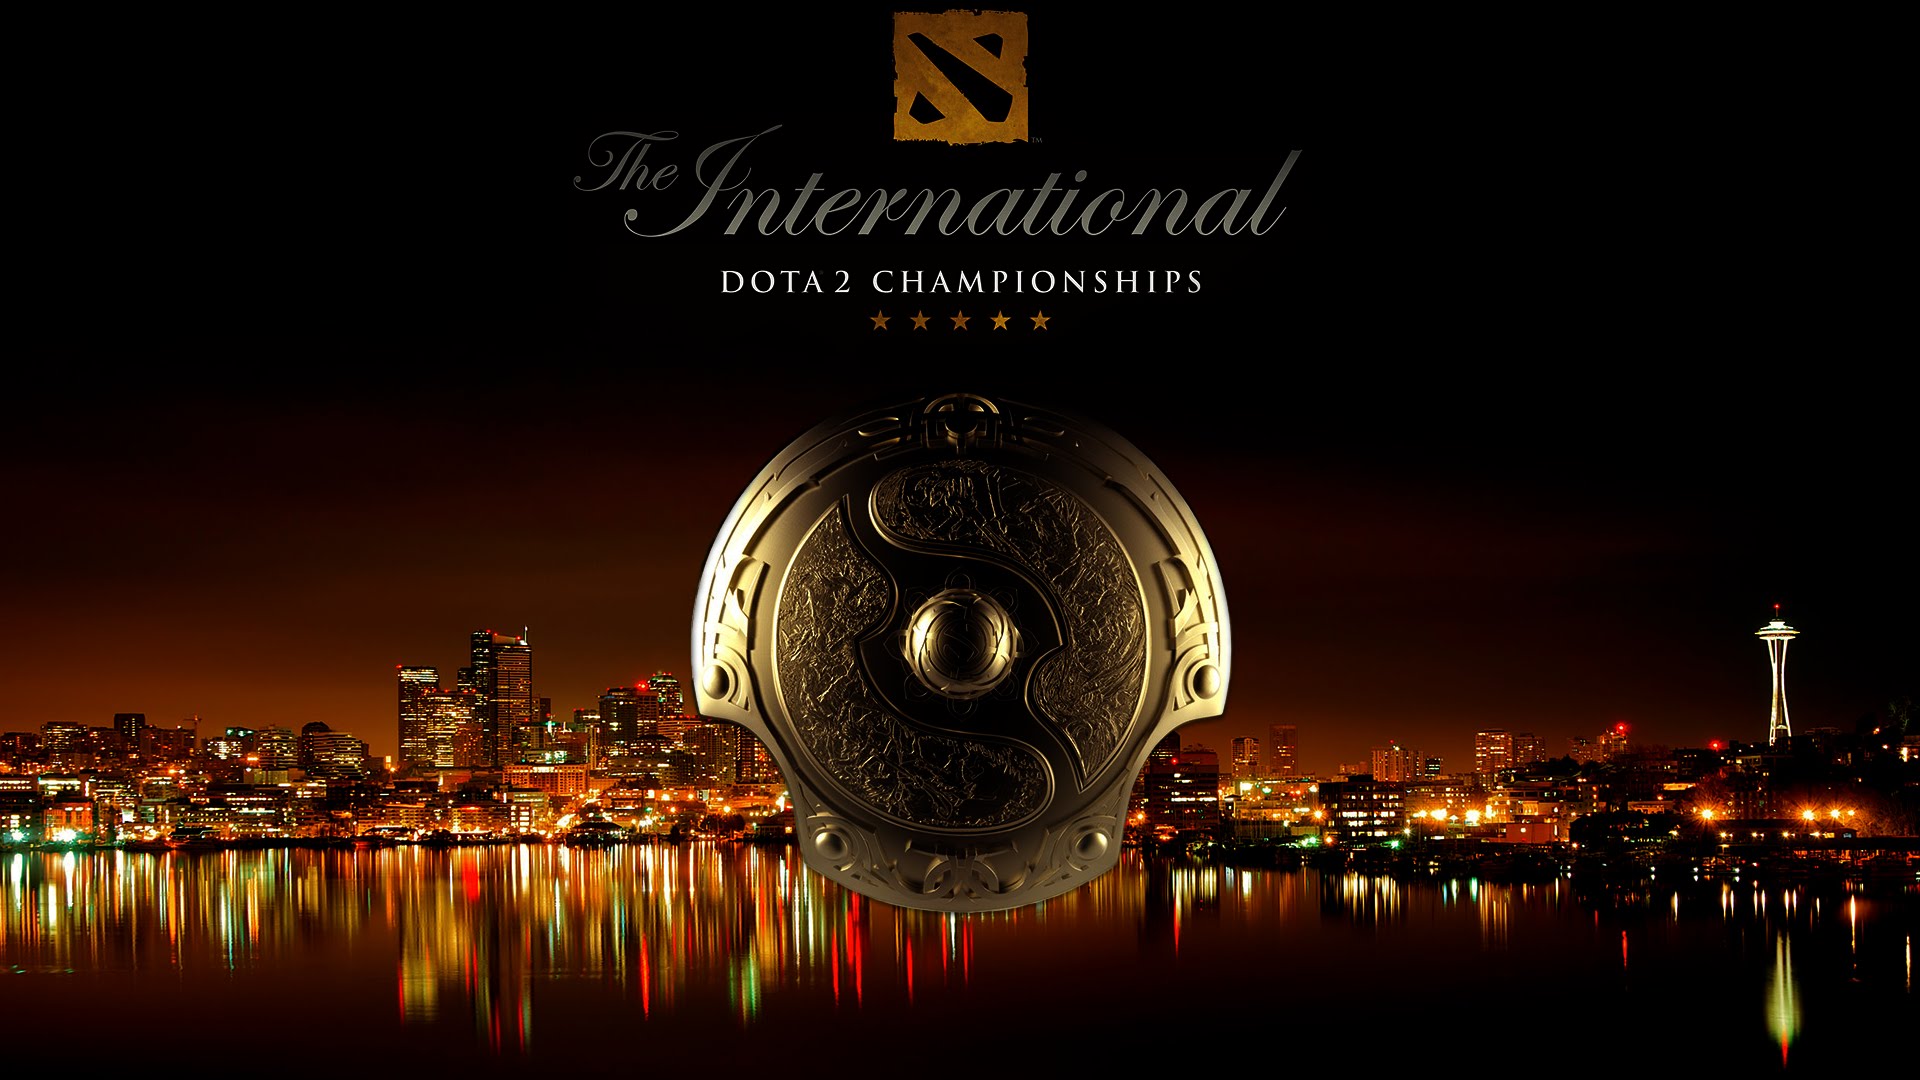 The International 2015 Is one of the Splendid eSports Championships